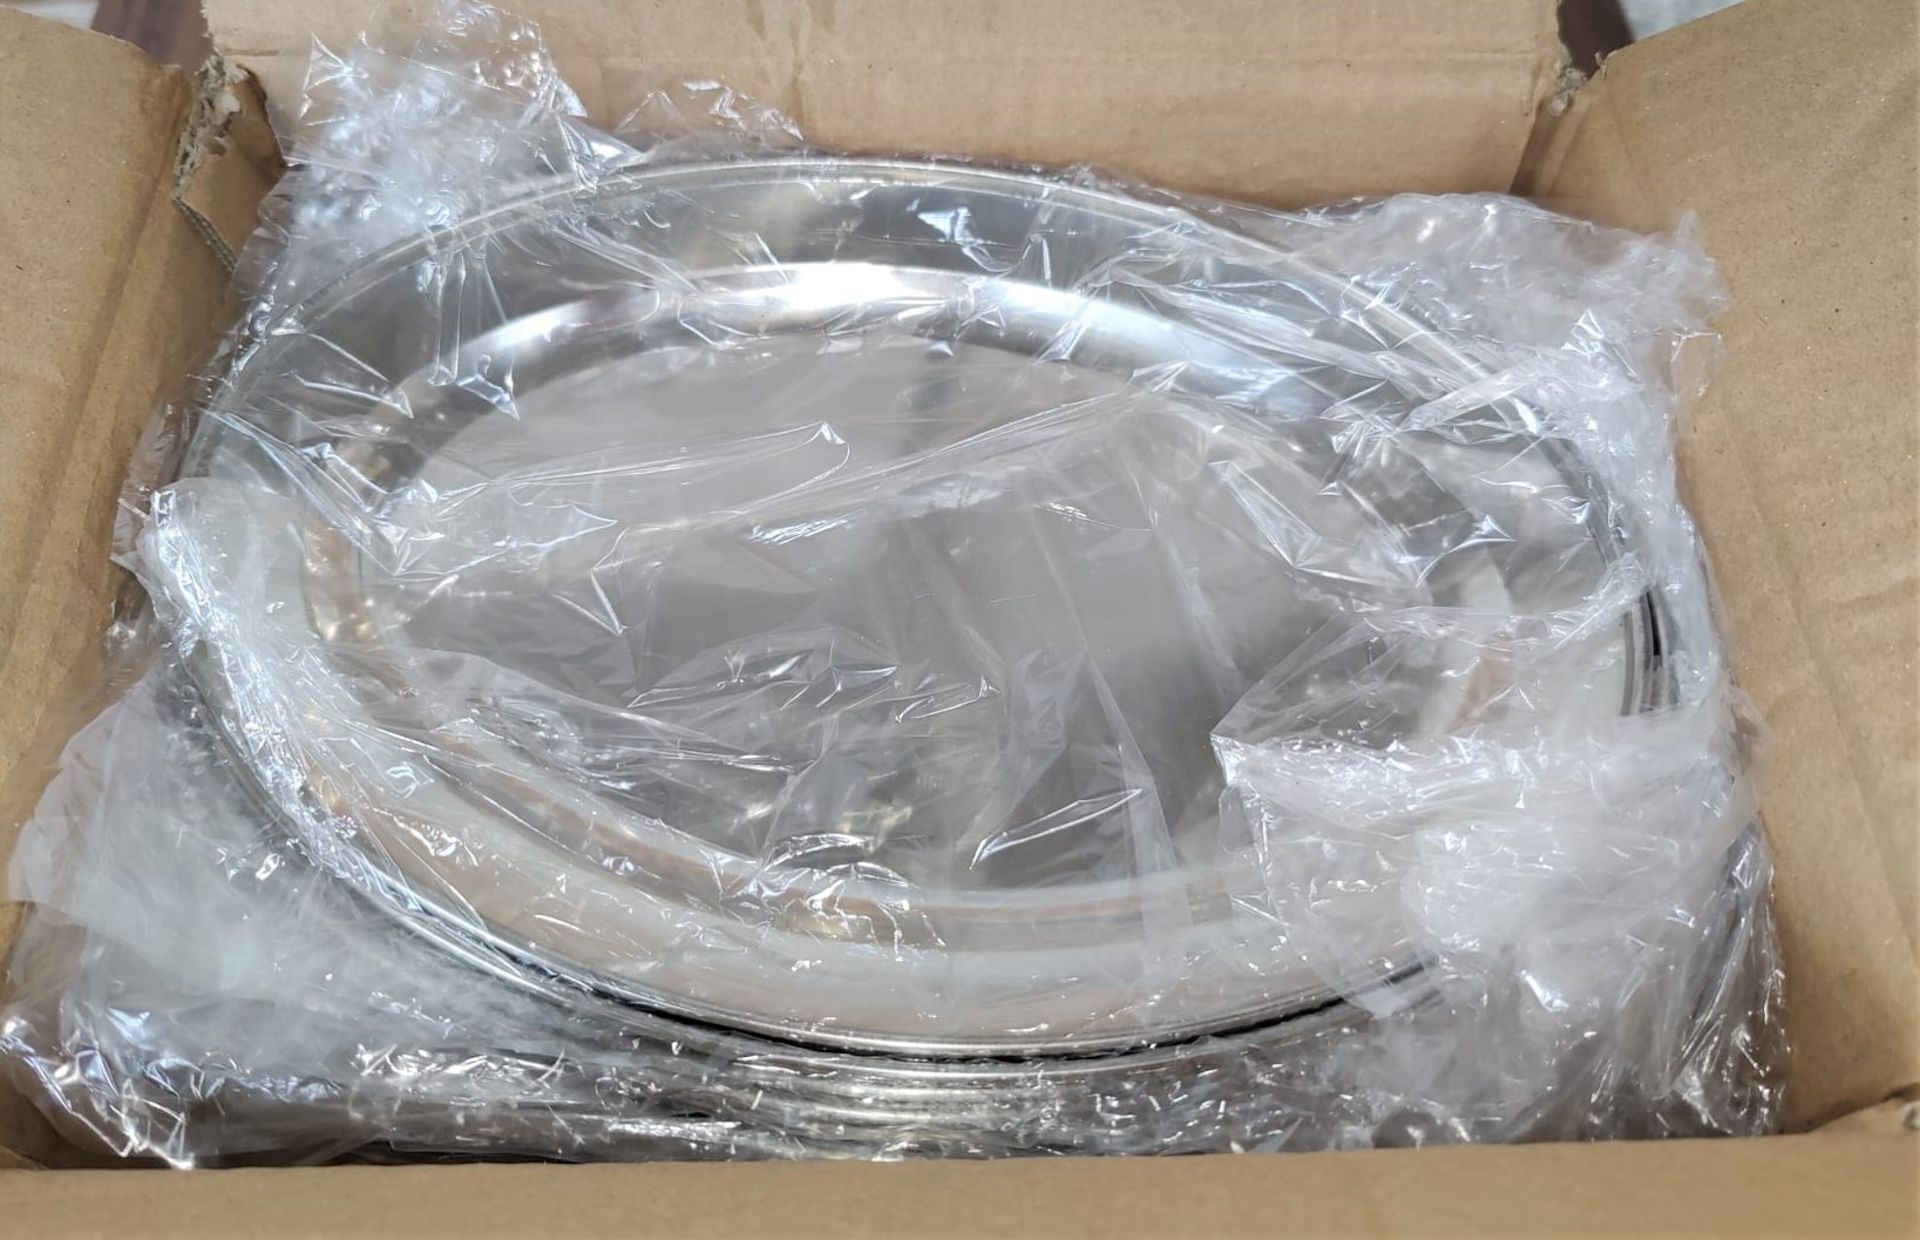 18 x Stainless Steel Small Oval Service Trays - Size: 255mm x 180mm - Brand New Boxed Stock RRP £90 - Image 6 of 7